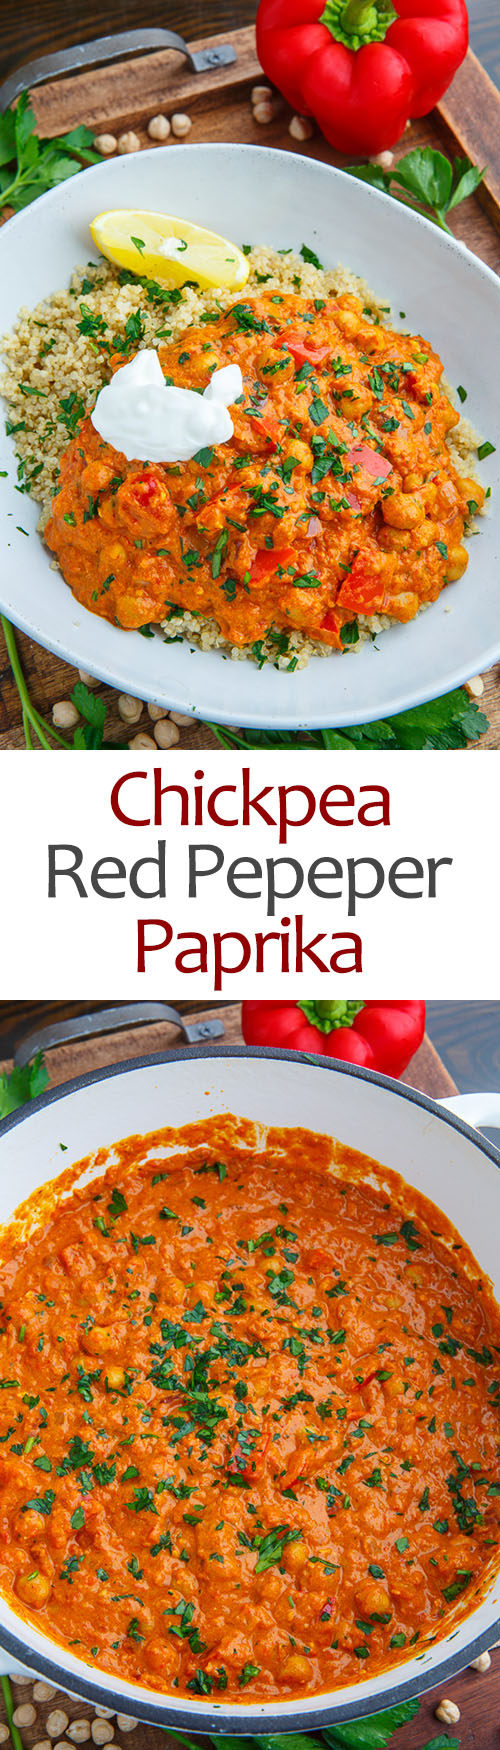 Chickpea and Red Pepper Paprika